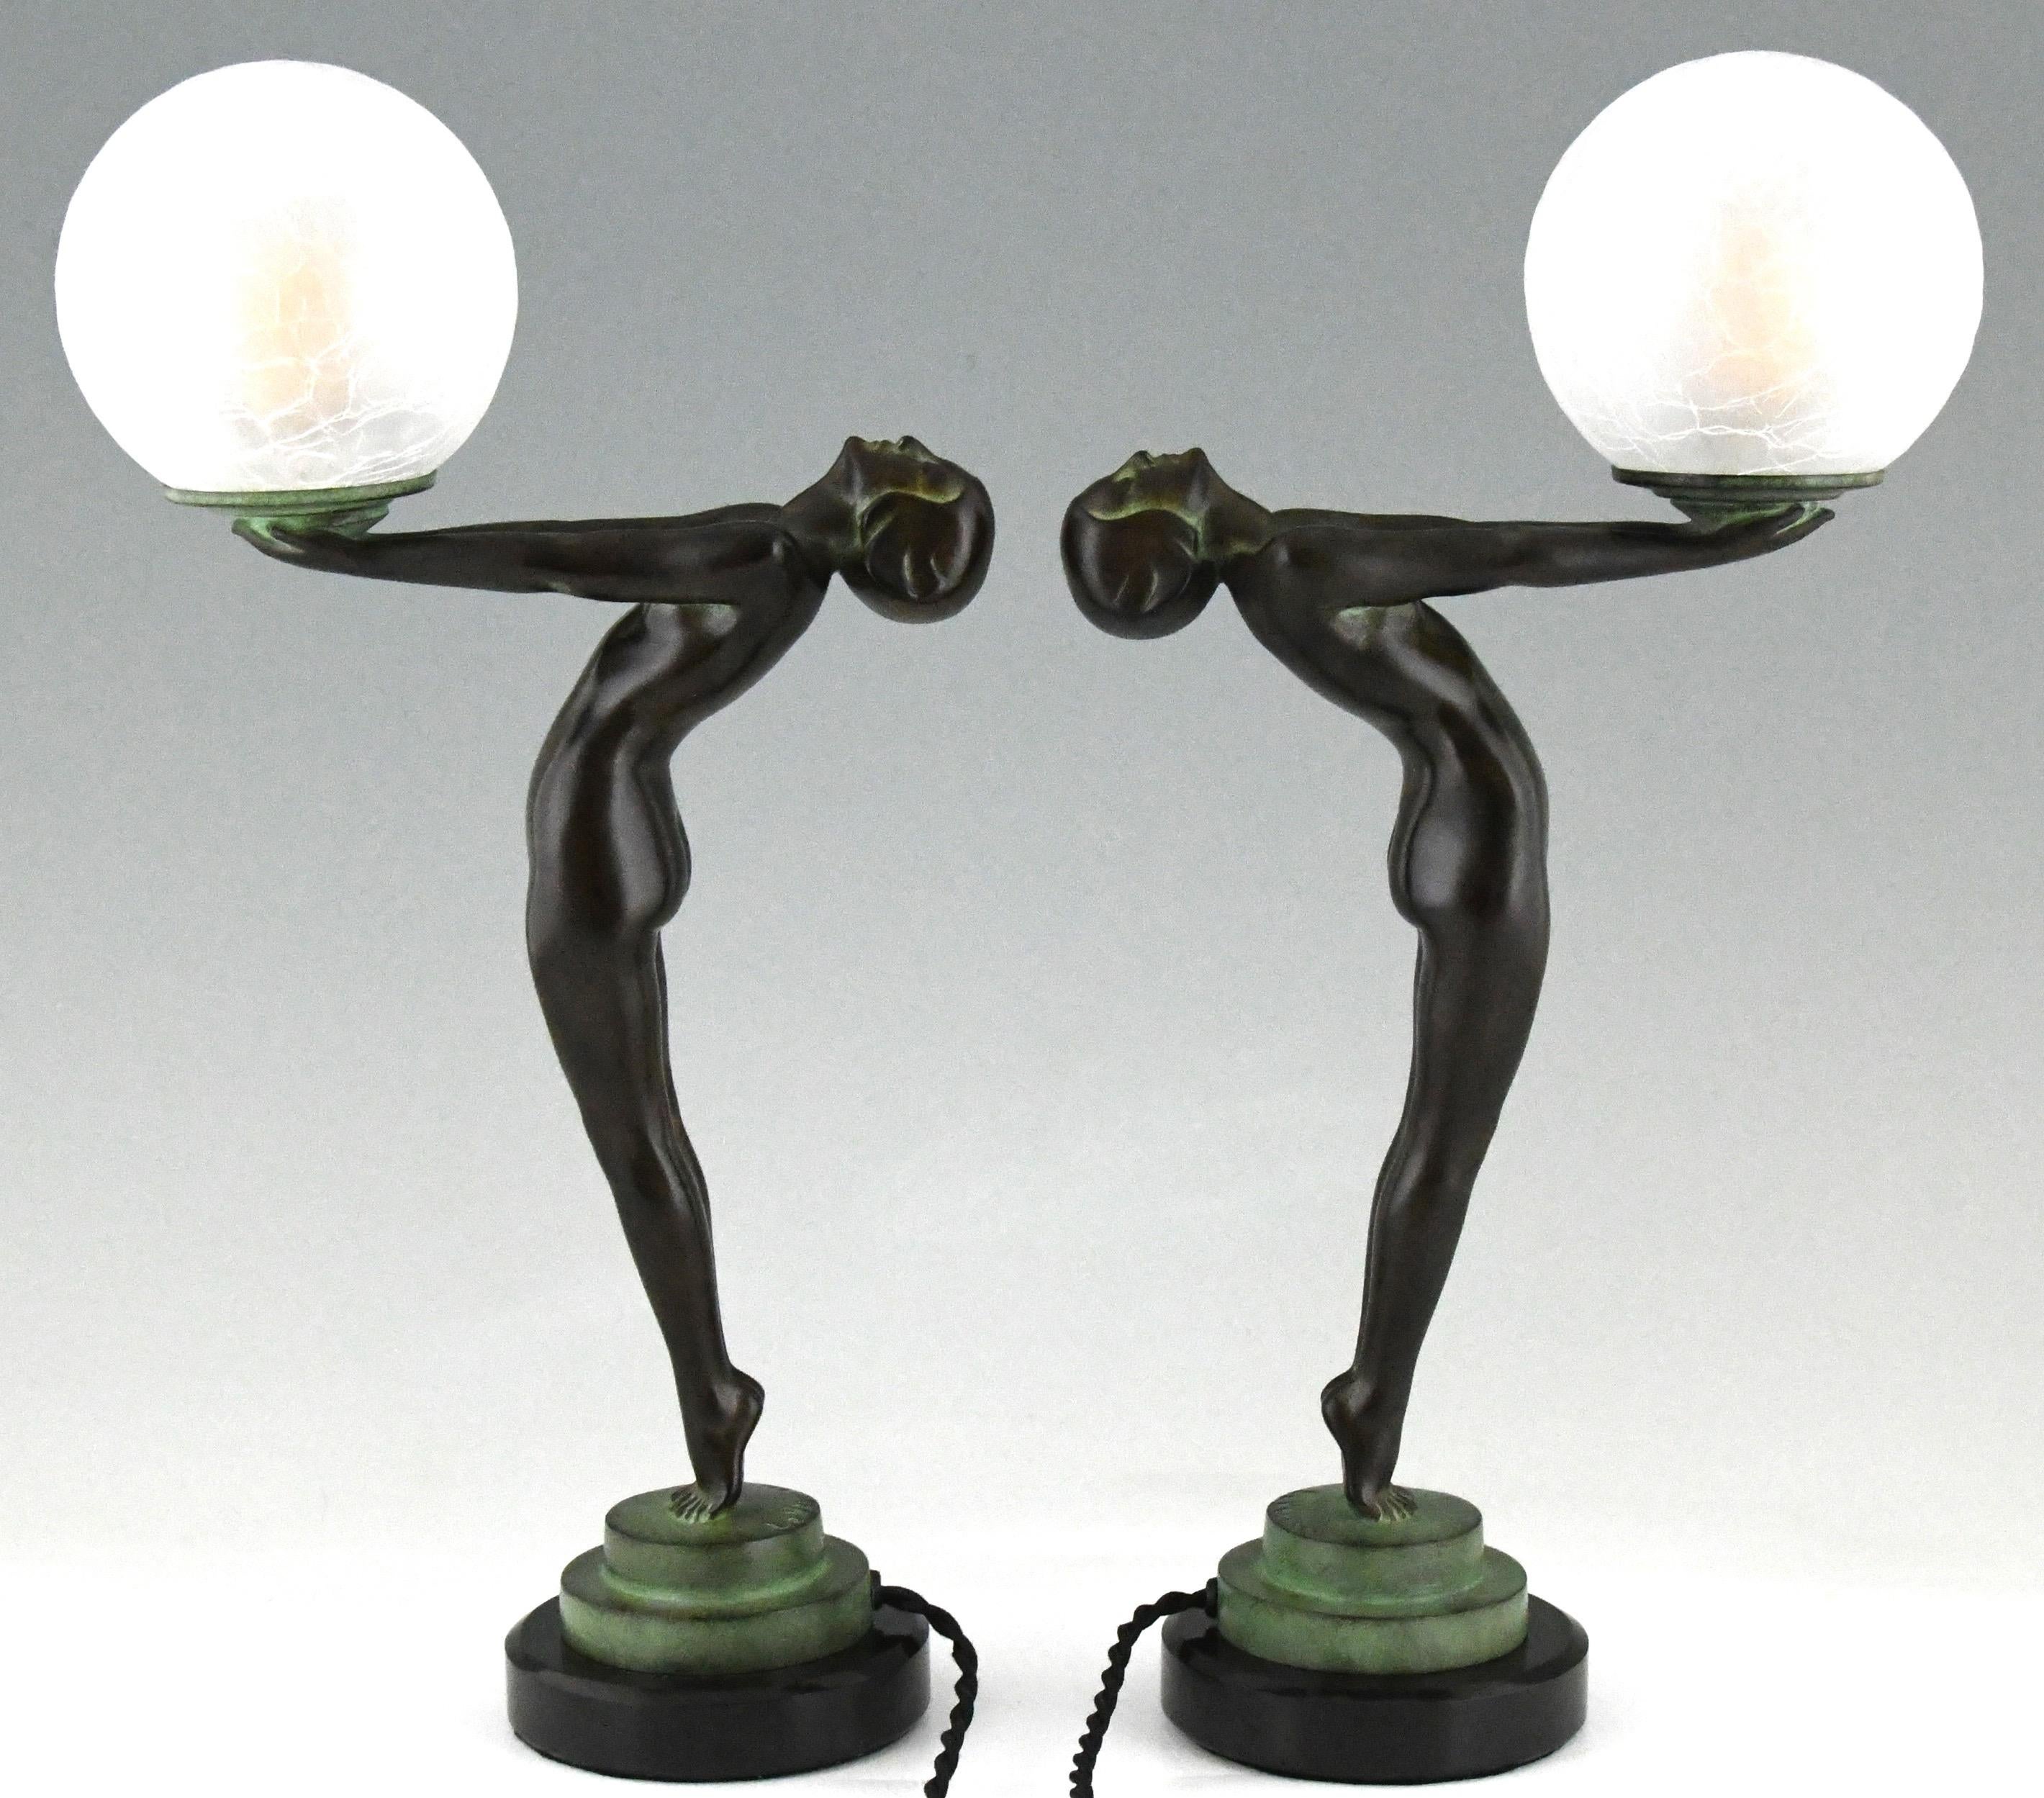 Patinated Pair of Art Deco Style Lamps Clarté Standing Nude with Globe by Max Le Verrier